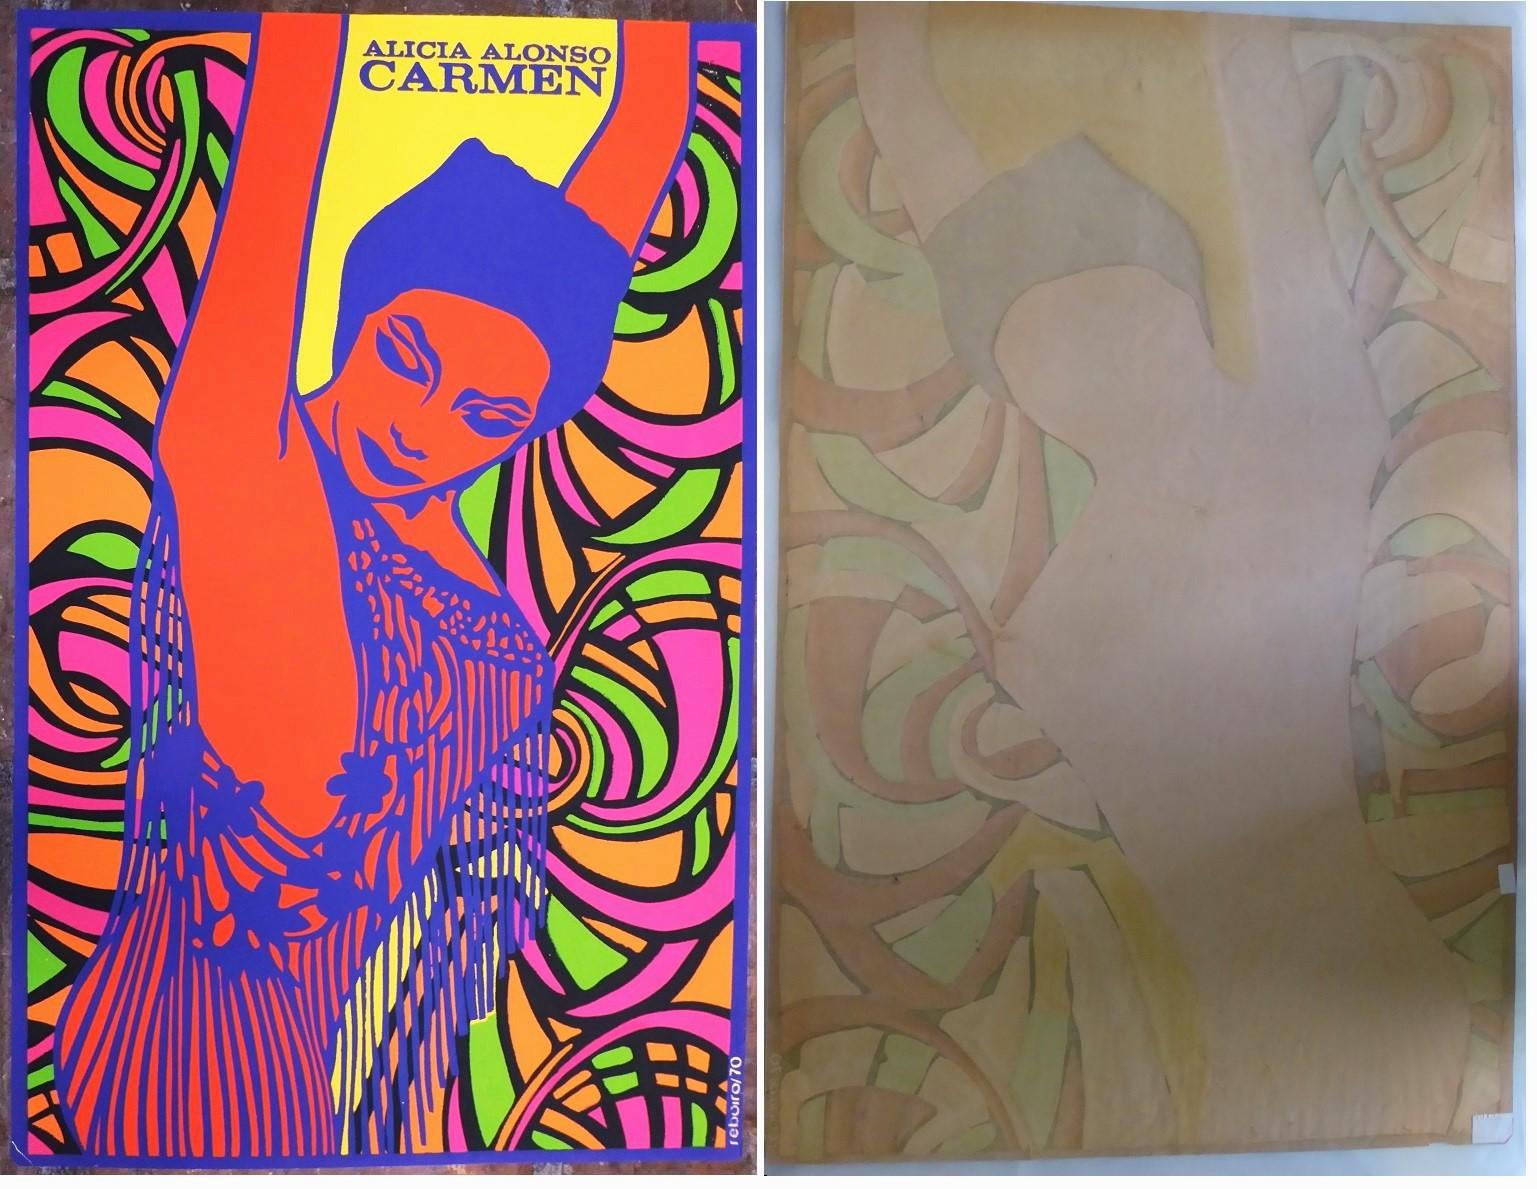 1 - Ballet silkscreen Cuban vintage poster “ALICIA ALONSO – CARMEN”  by Antonio Fernández Reboiro 1970 for the ICAIC.
Lower right engraved reboiro/70 and signed in ink roboiro
Condition:  Very Good. Bottom shows some minor folds. Acid free tape on